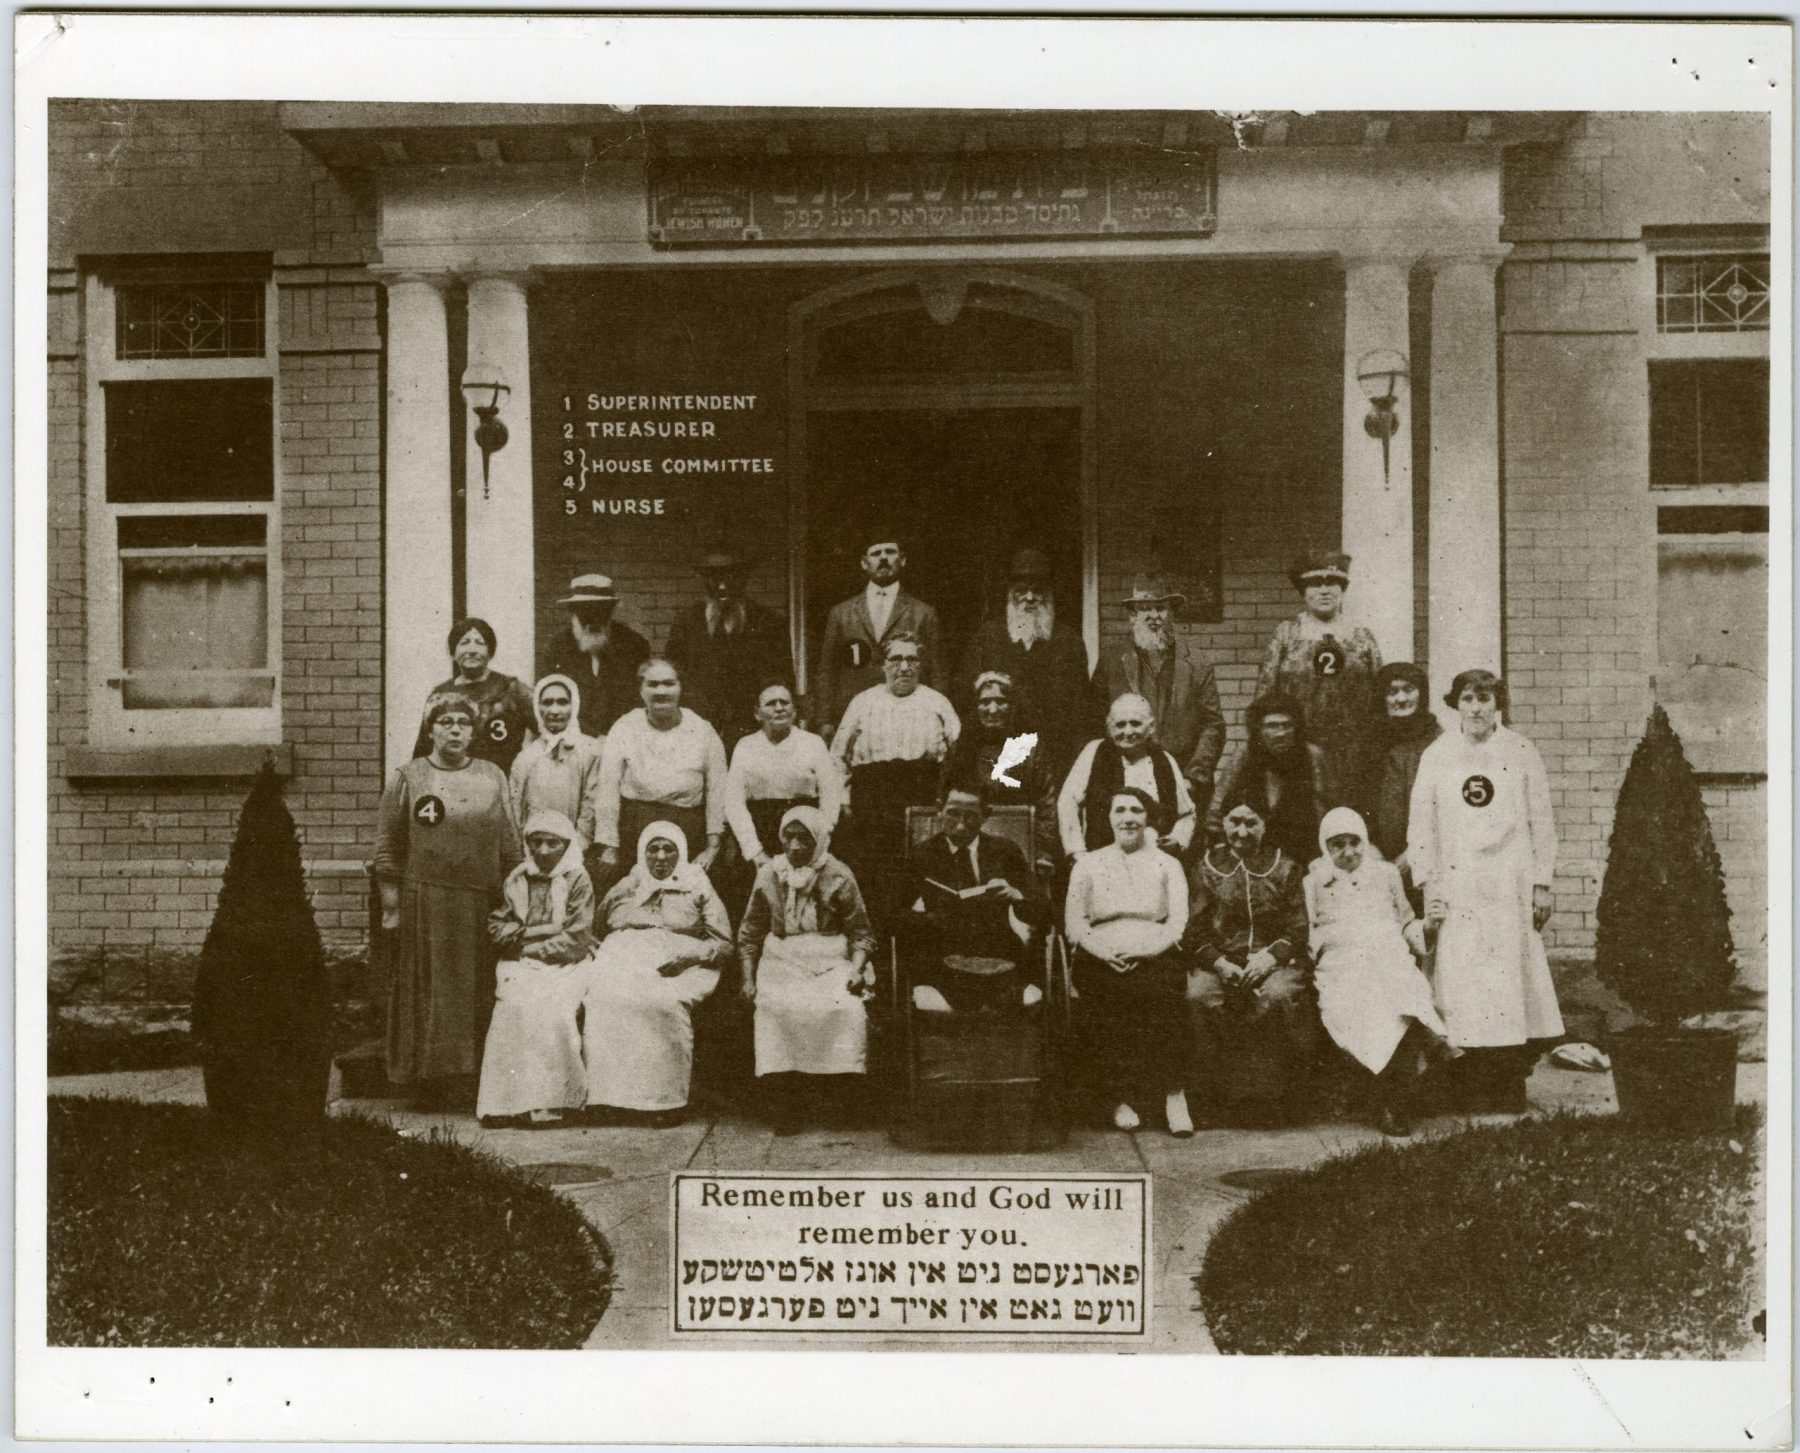 Residents and staff gathered in front of the Jewish Old Folks' Home on Cecil Street. On the upper-left side of the photo there is a legend to identify the superintendent, treasurer, house committee, and nurse at the home. [ca. 1925].

OJA, fonds 14, series 6, item 2.
